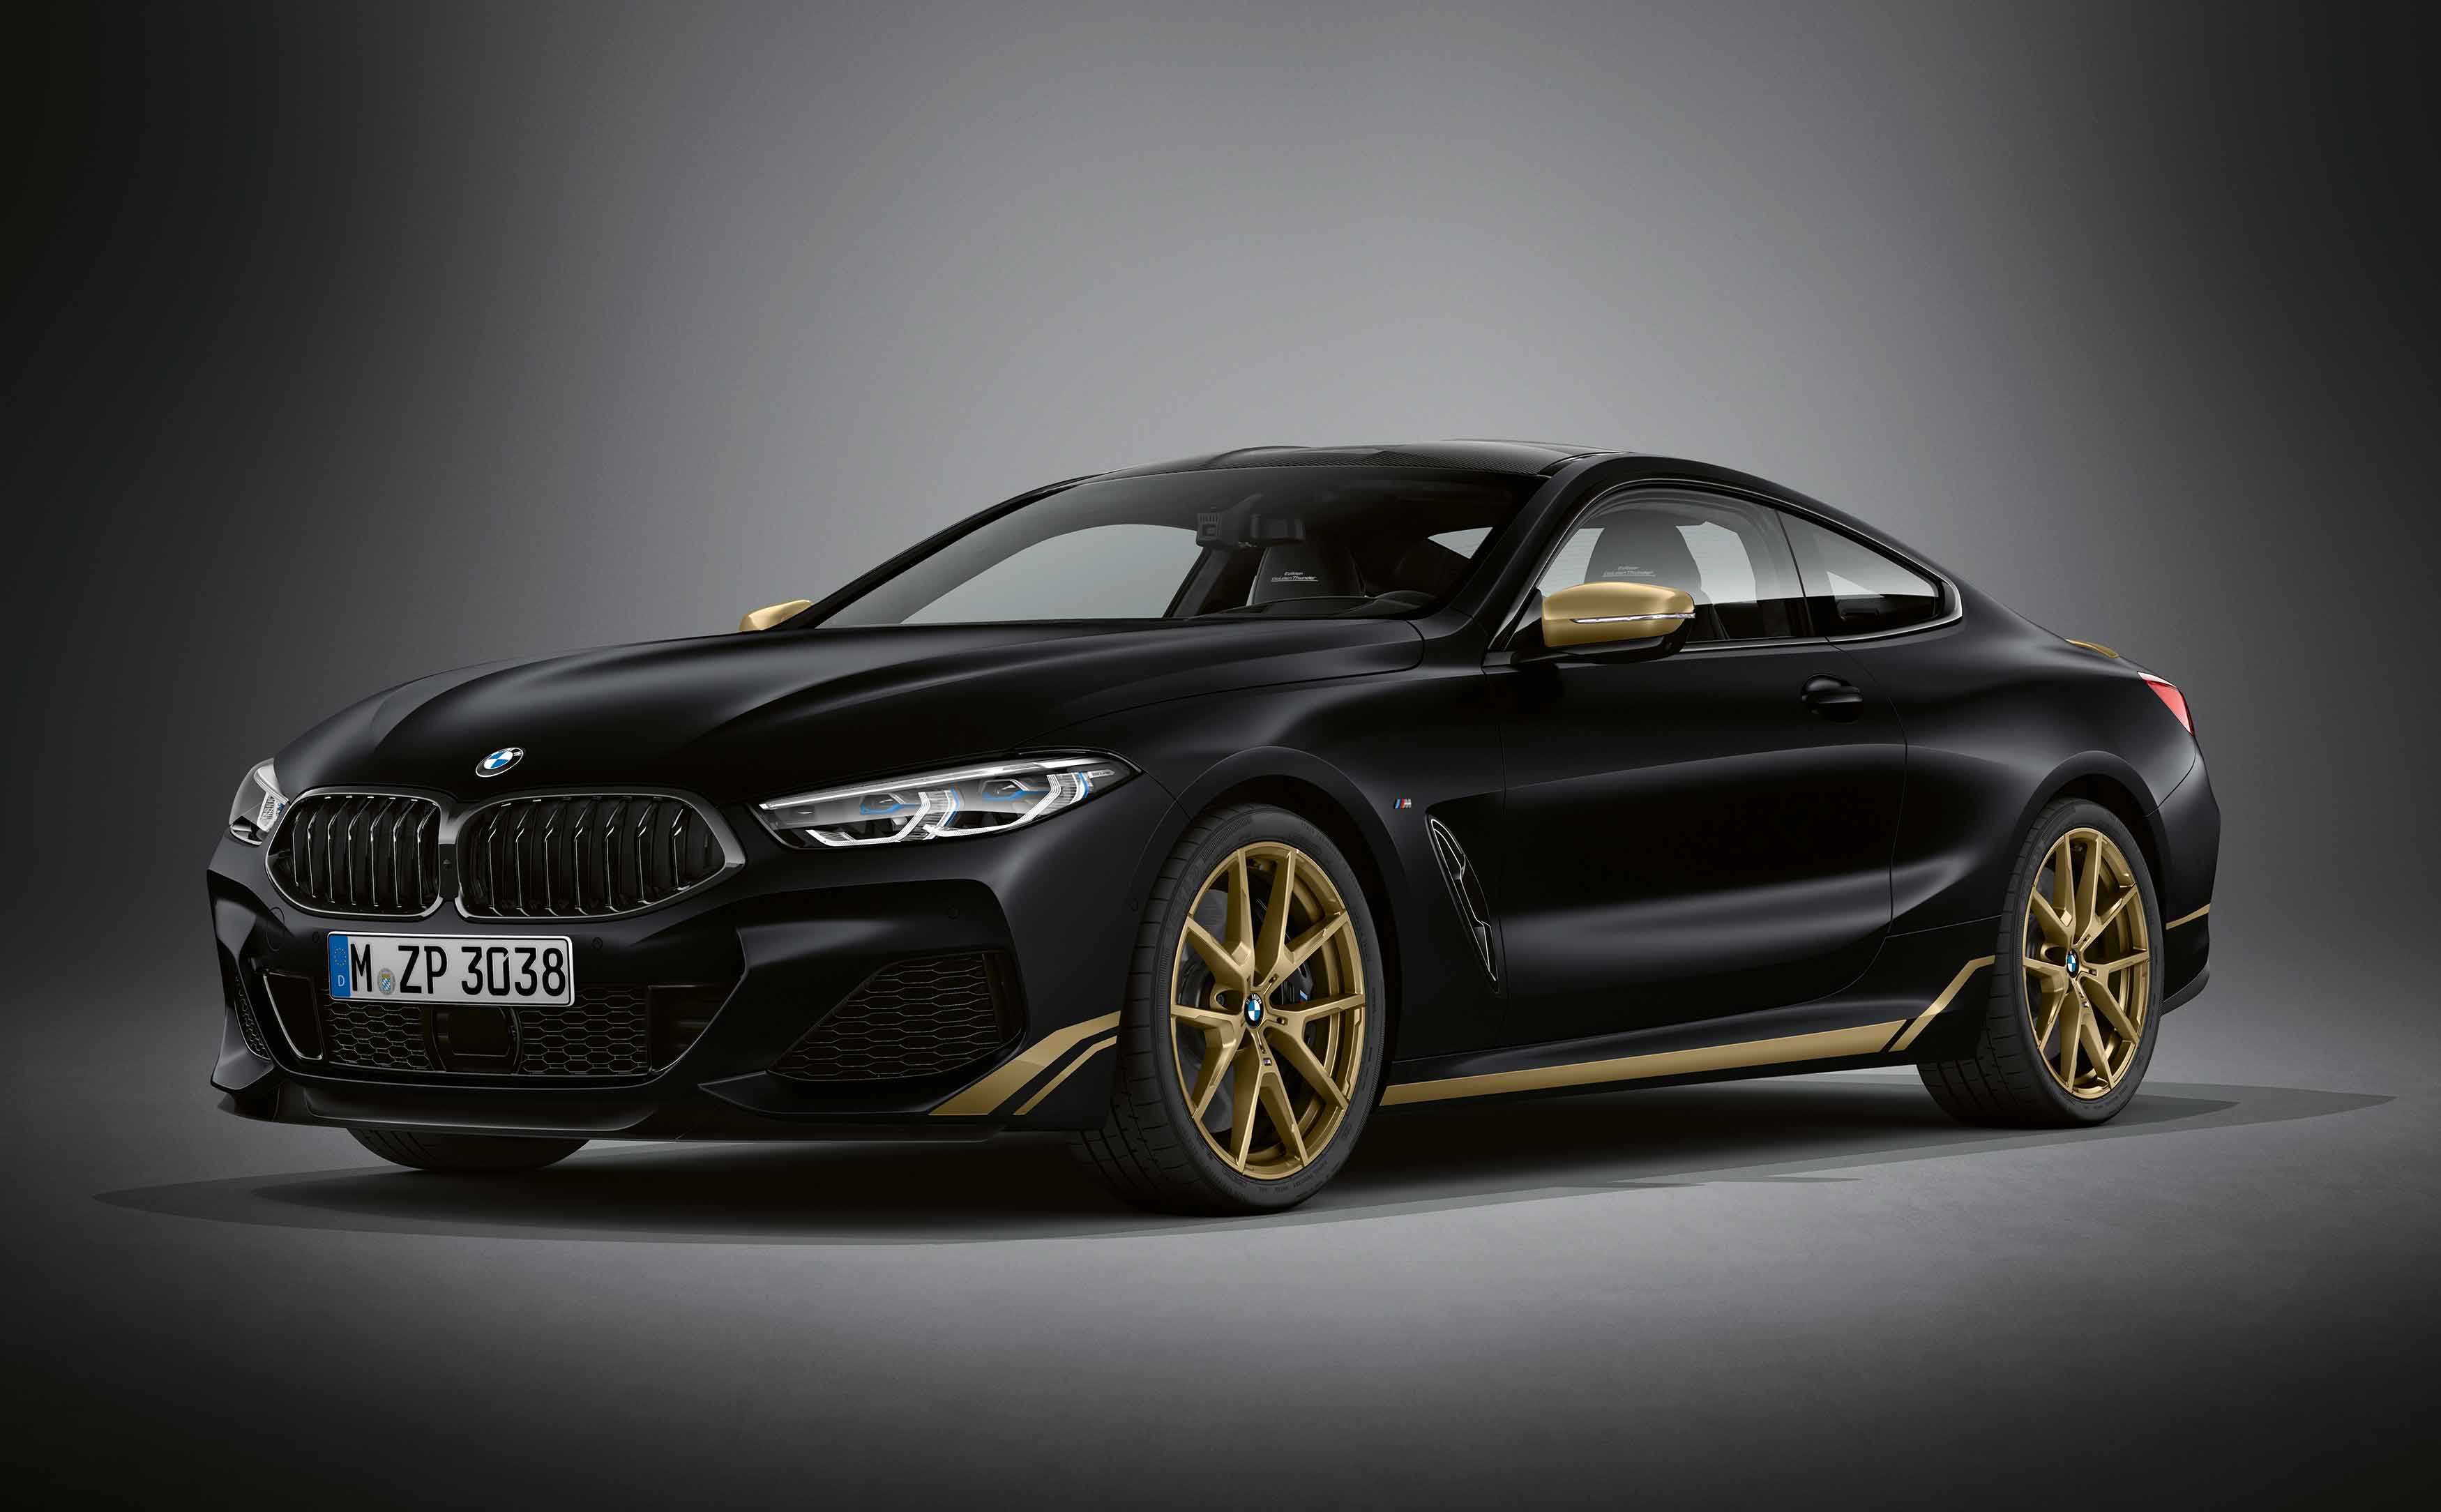 The BMW 8 Series Golden Thunder Edition